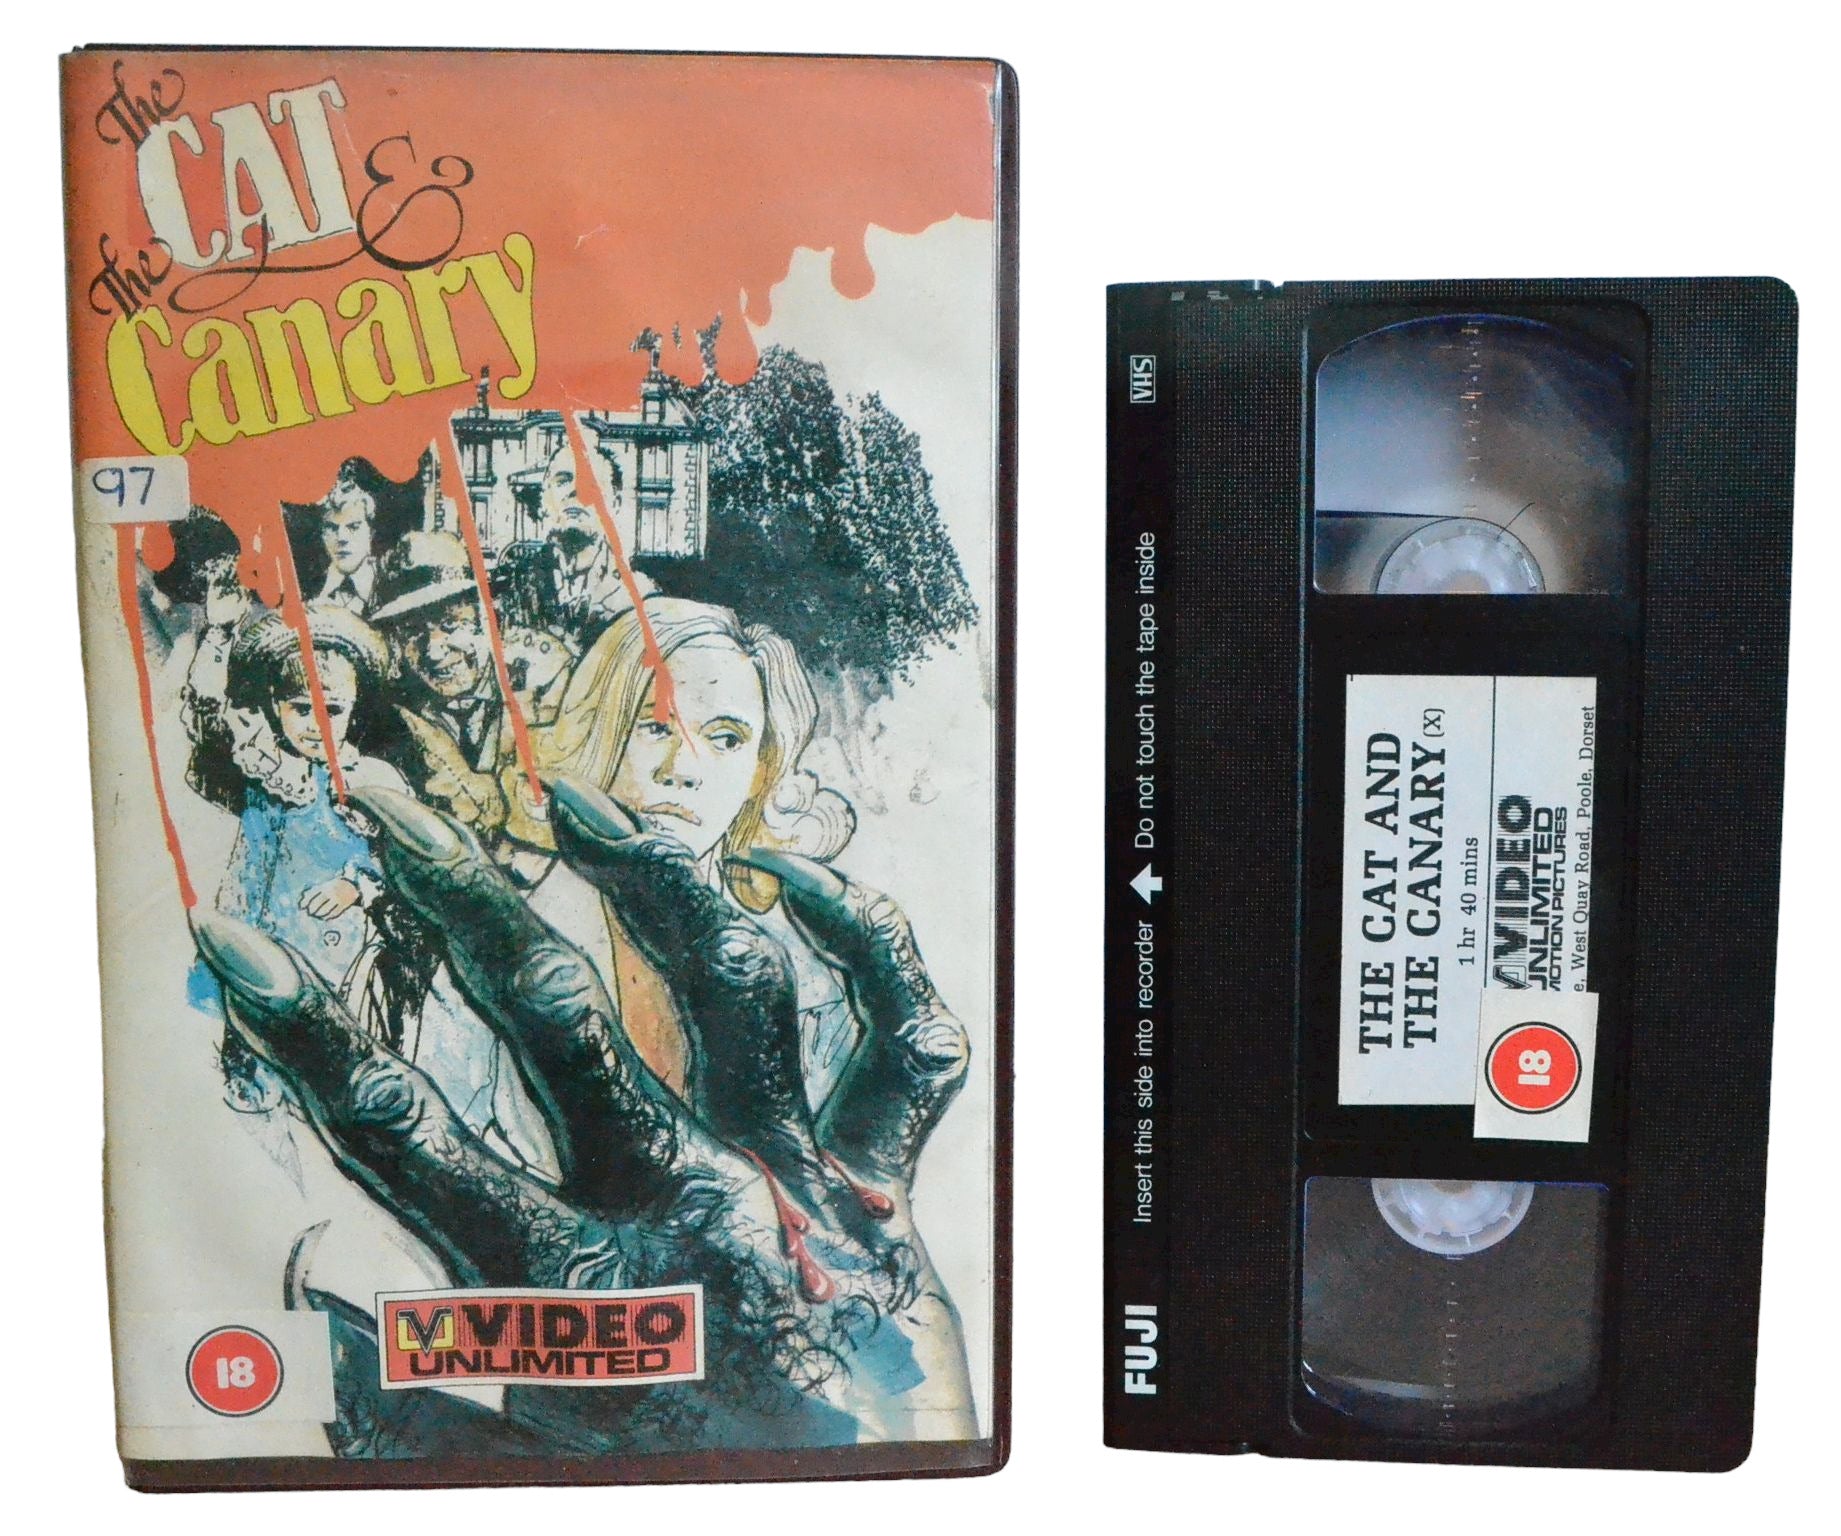 The Cat And The Canary - Honor Blackman - Video Unlimited Motion Pictures - Large Box - PAL - VHS-